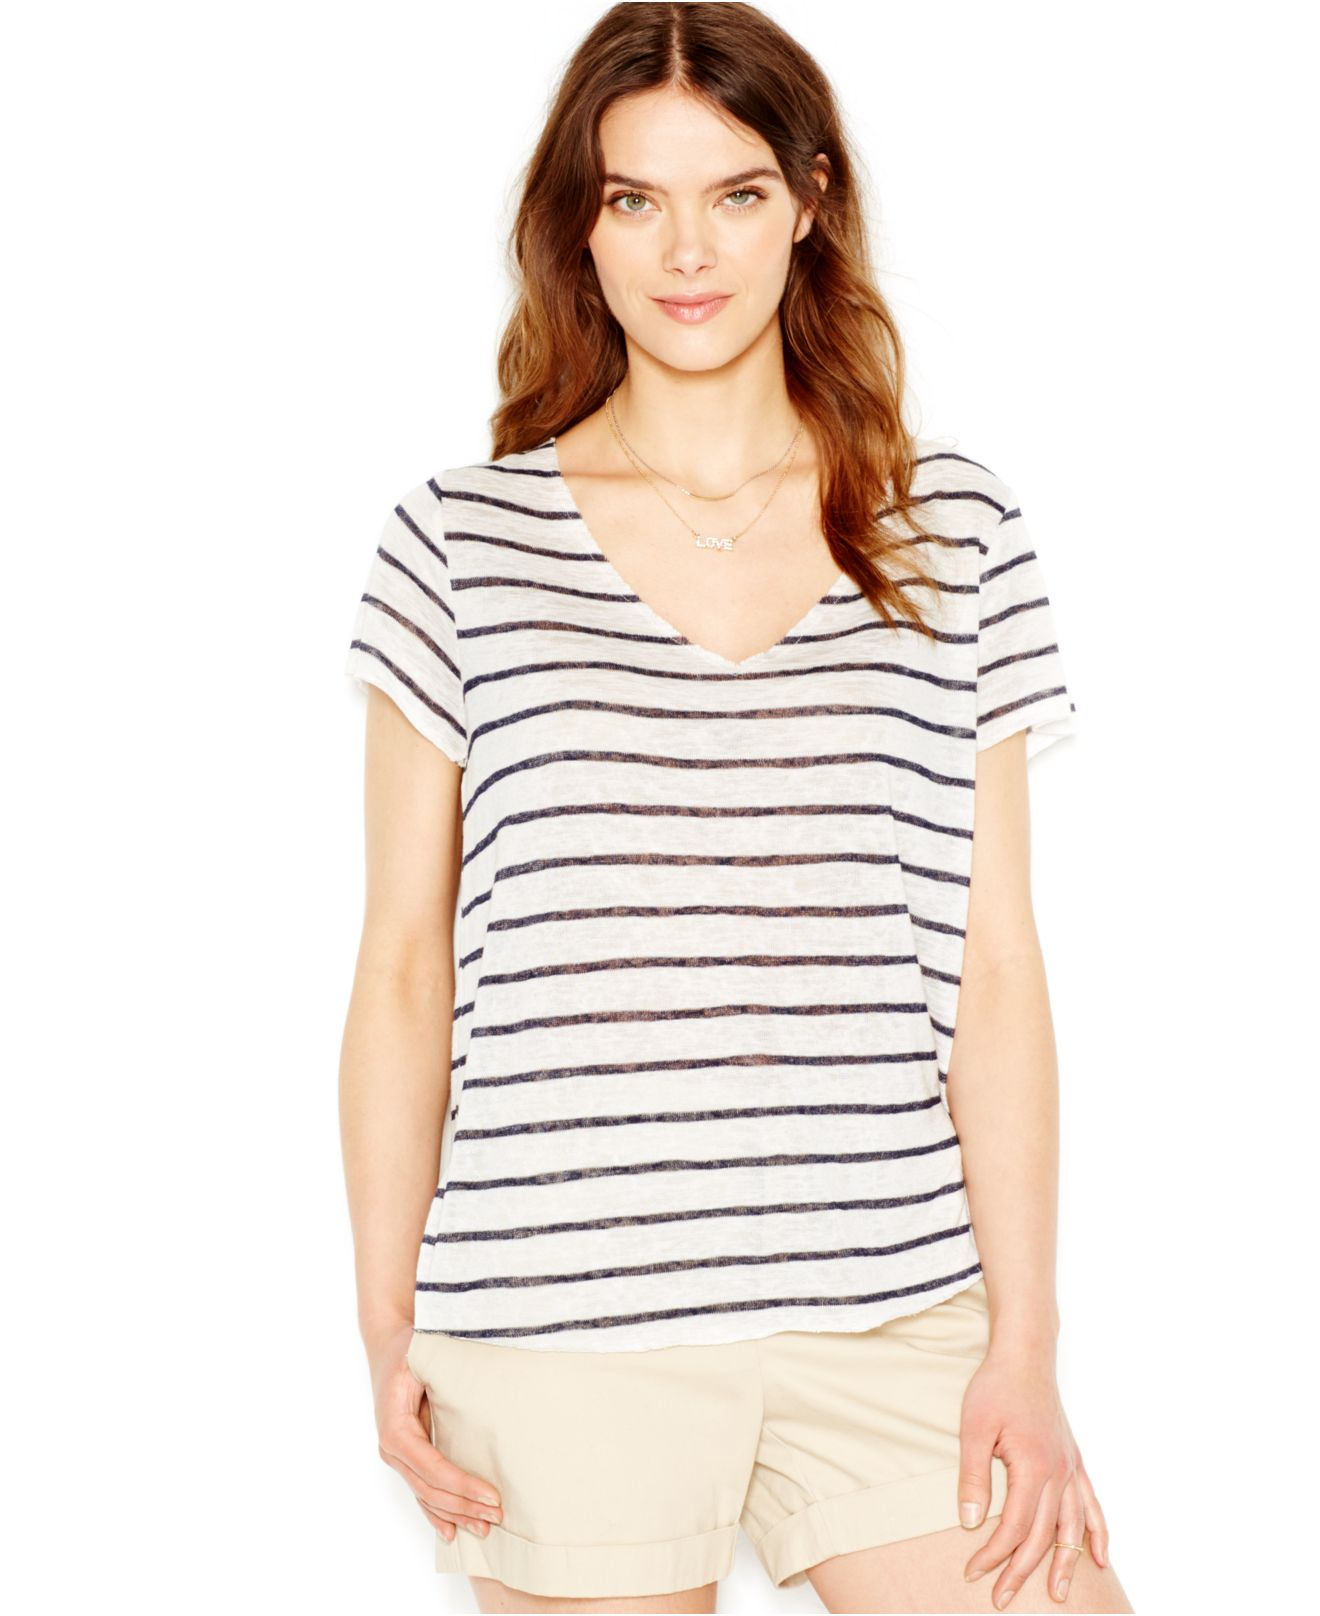 Maison jules Short-sleeve Striped Top in Blue | Lyst